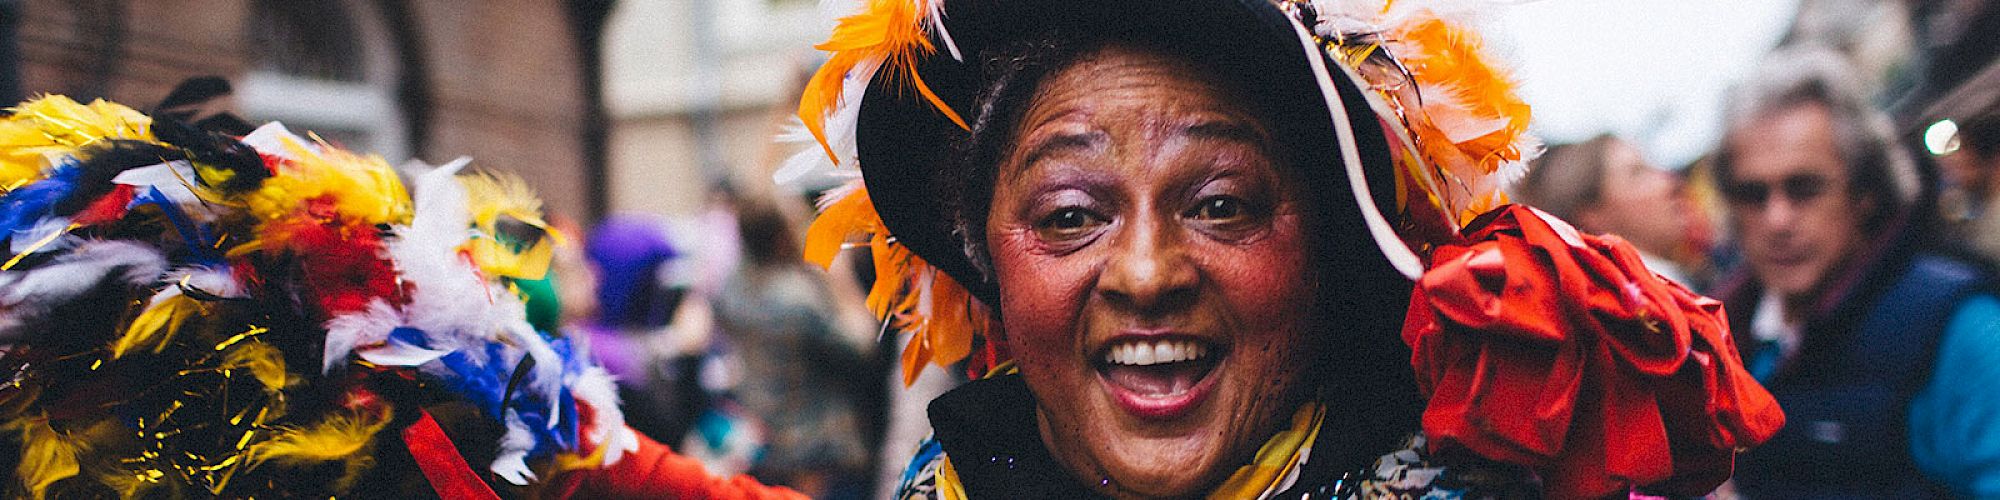 A joyful person in colorful attire and a festive hat surrounded by others, likely at a carnival or parade, smiles brightly at the camera.